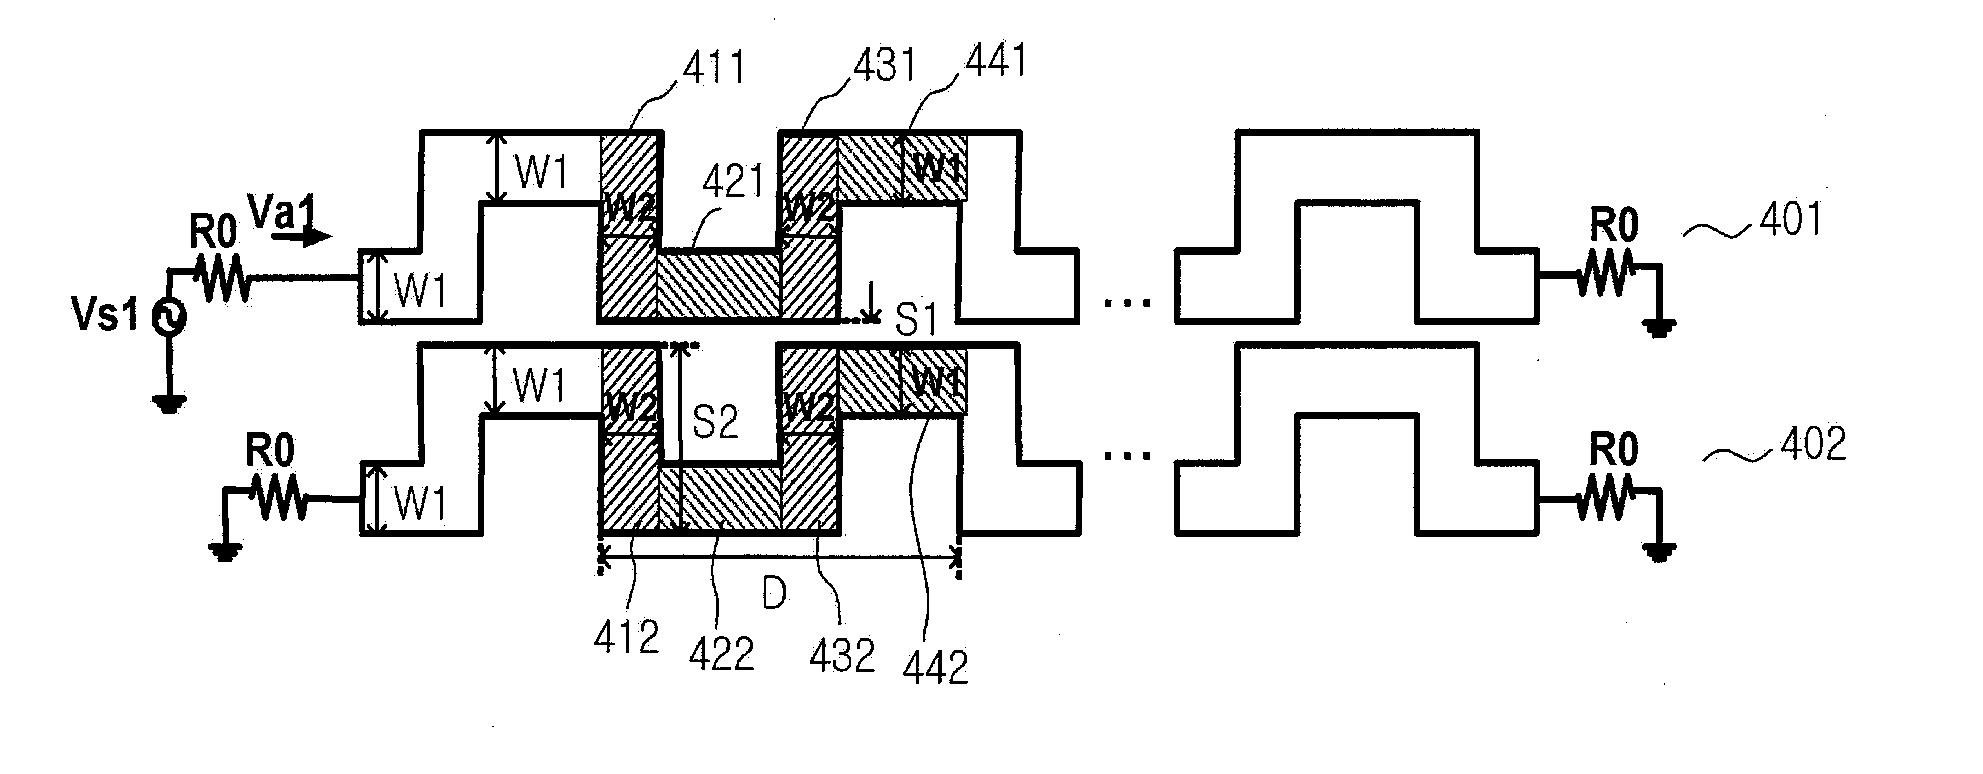 Micro-strip transmission line structure of a serpentine type